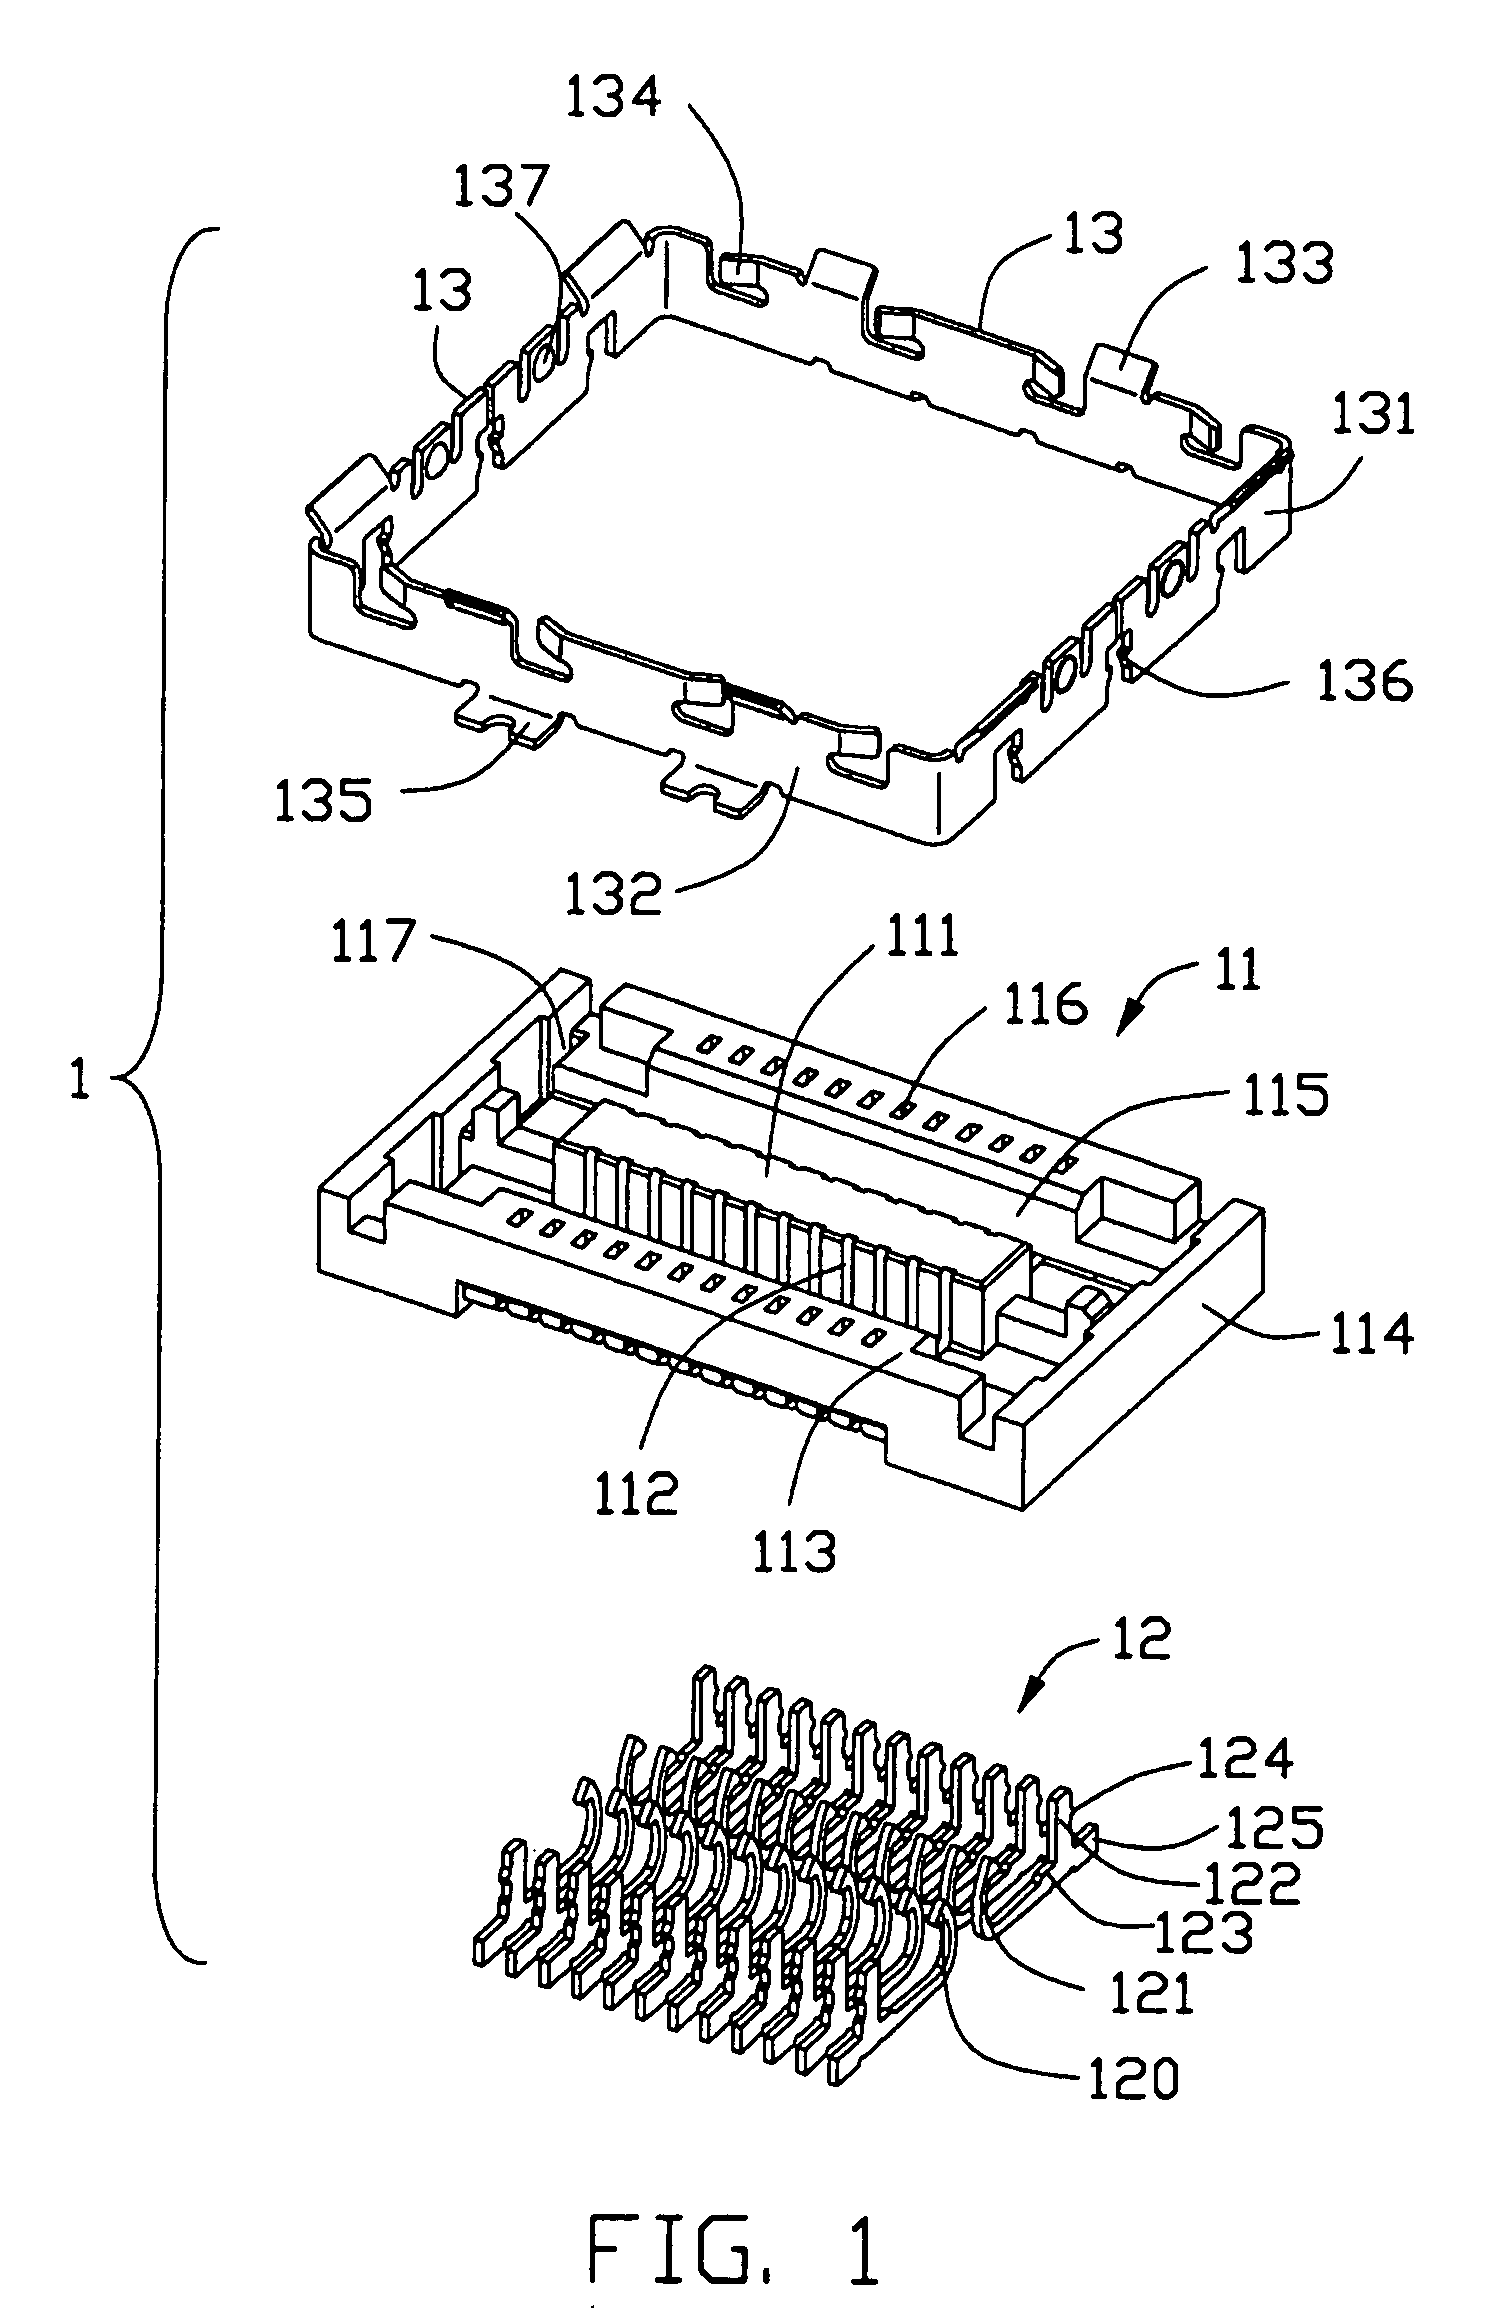 Shielded electrical connector assembly